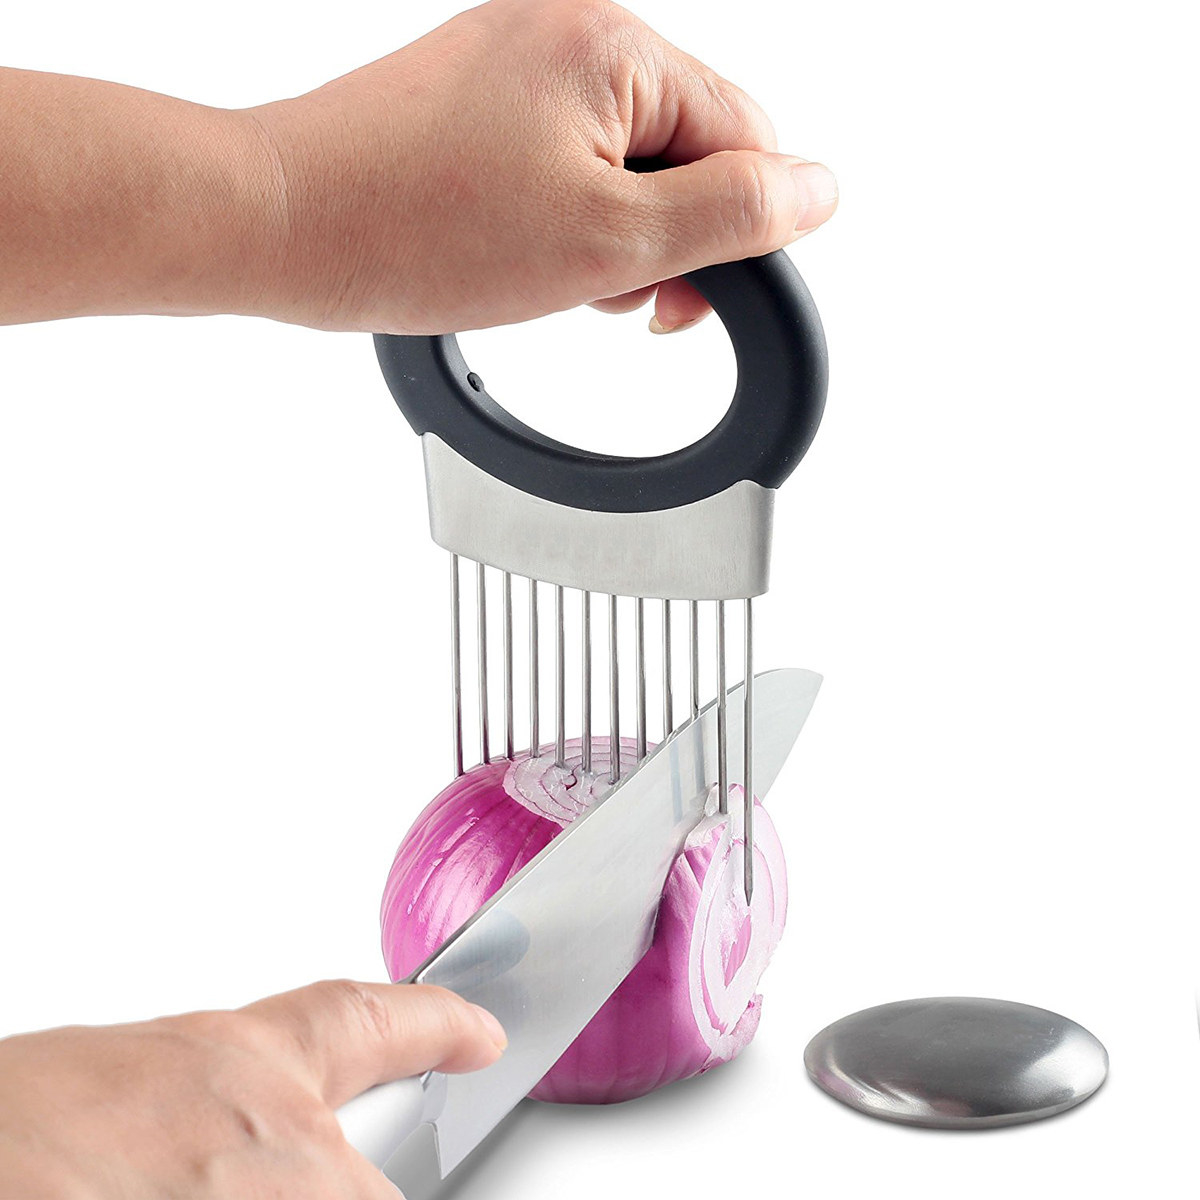 a hand chopping an onion held in place by the stainless steel holder